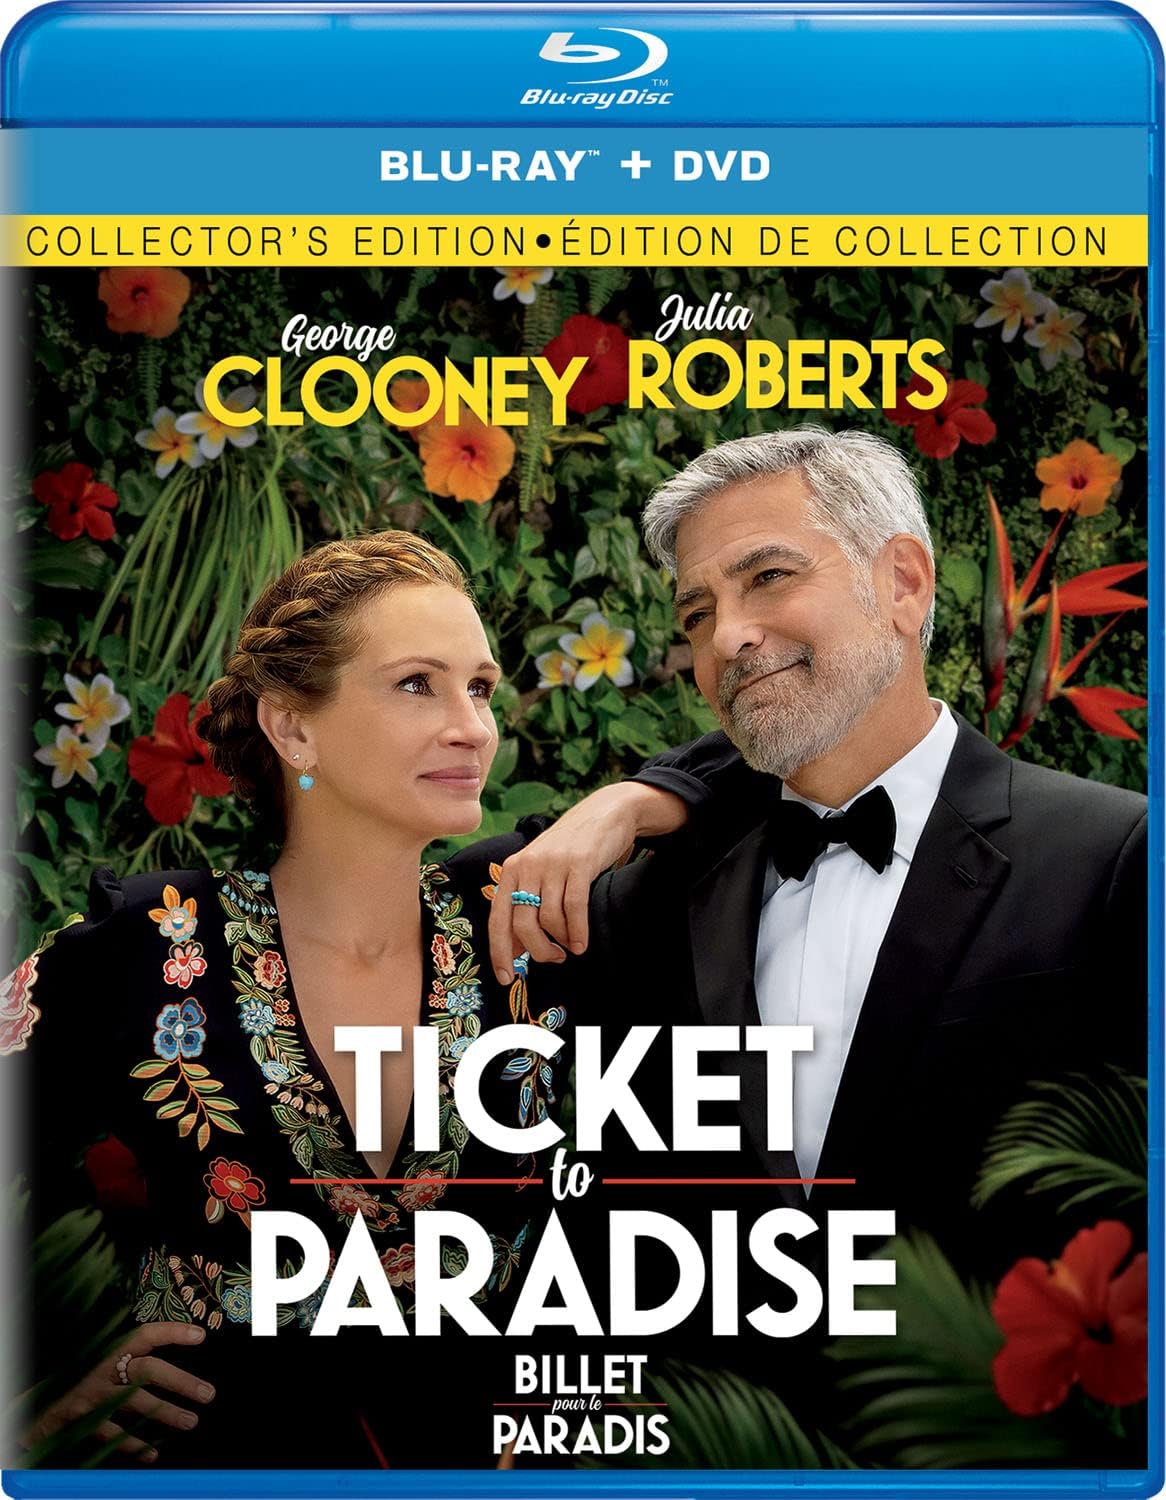 Ticket to Paradise - Collector's Edition Blu-ray + DVD